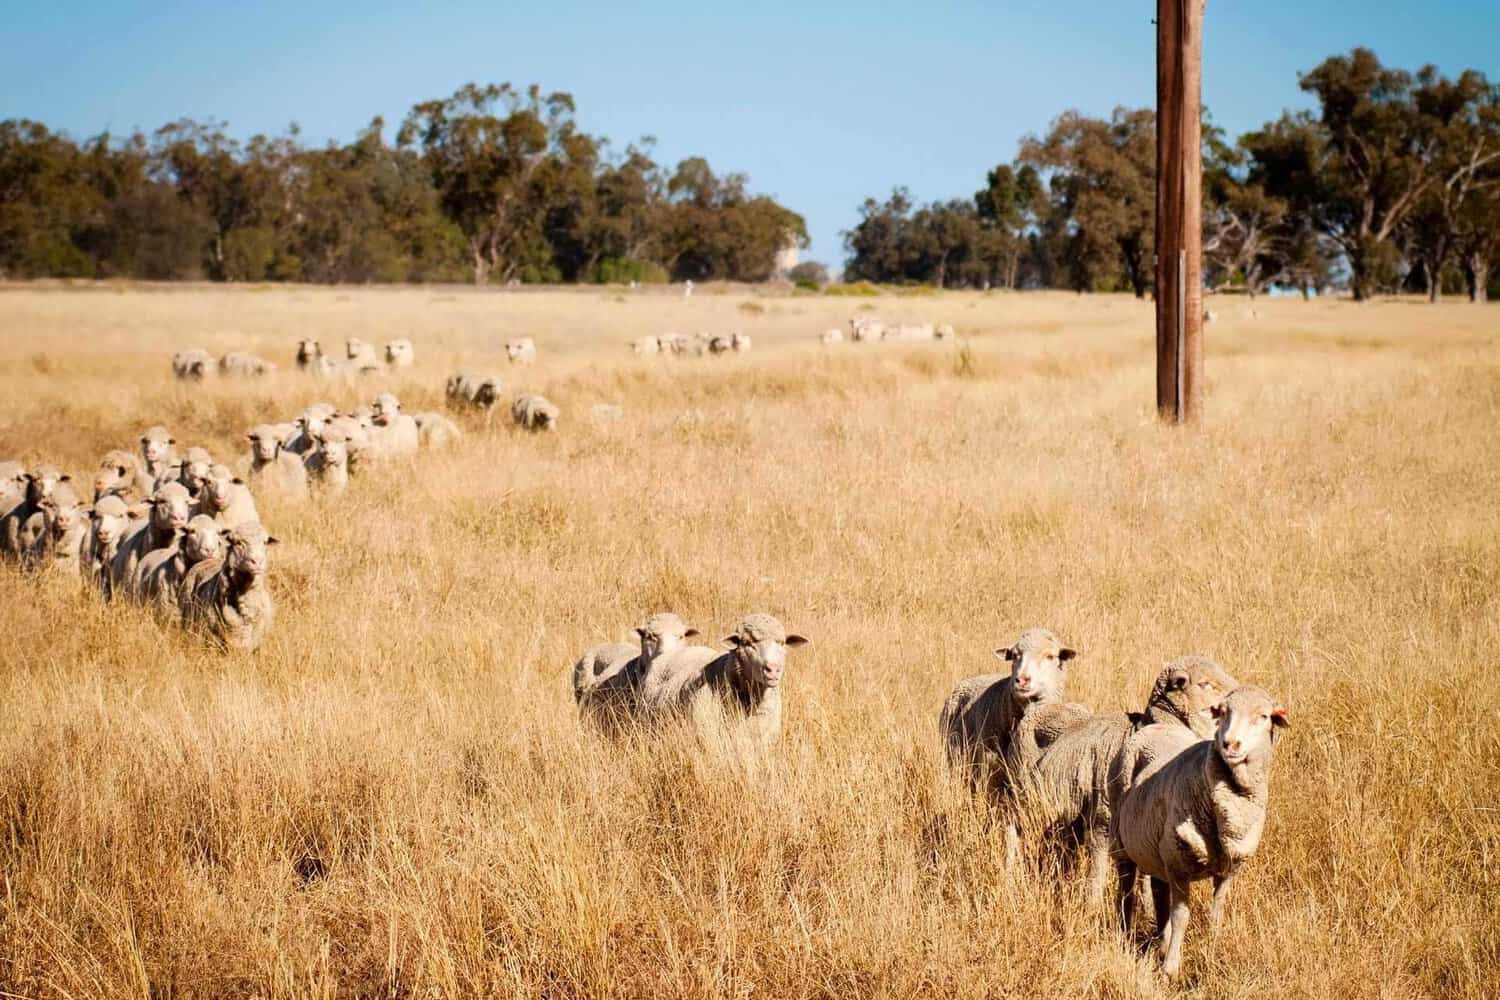 A flock of sheep grazing on a golden field with sparse trees in the background and a single utility pole standing tall. The pastoral scene captures the essence of rural life near Geraldton.